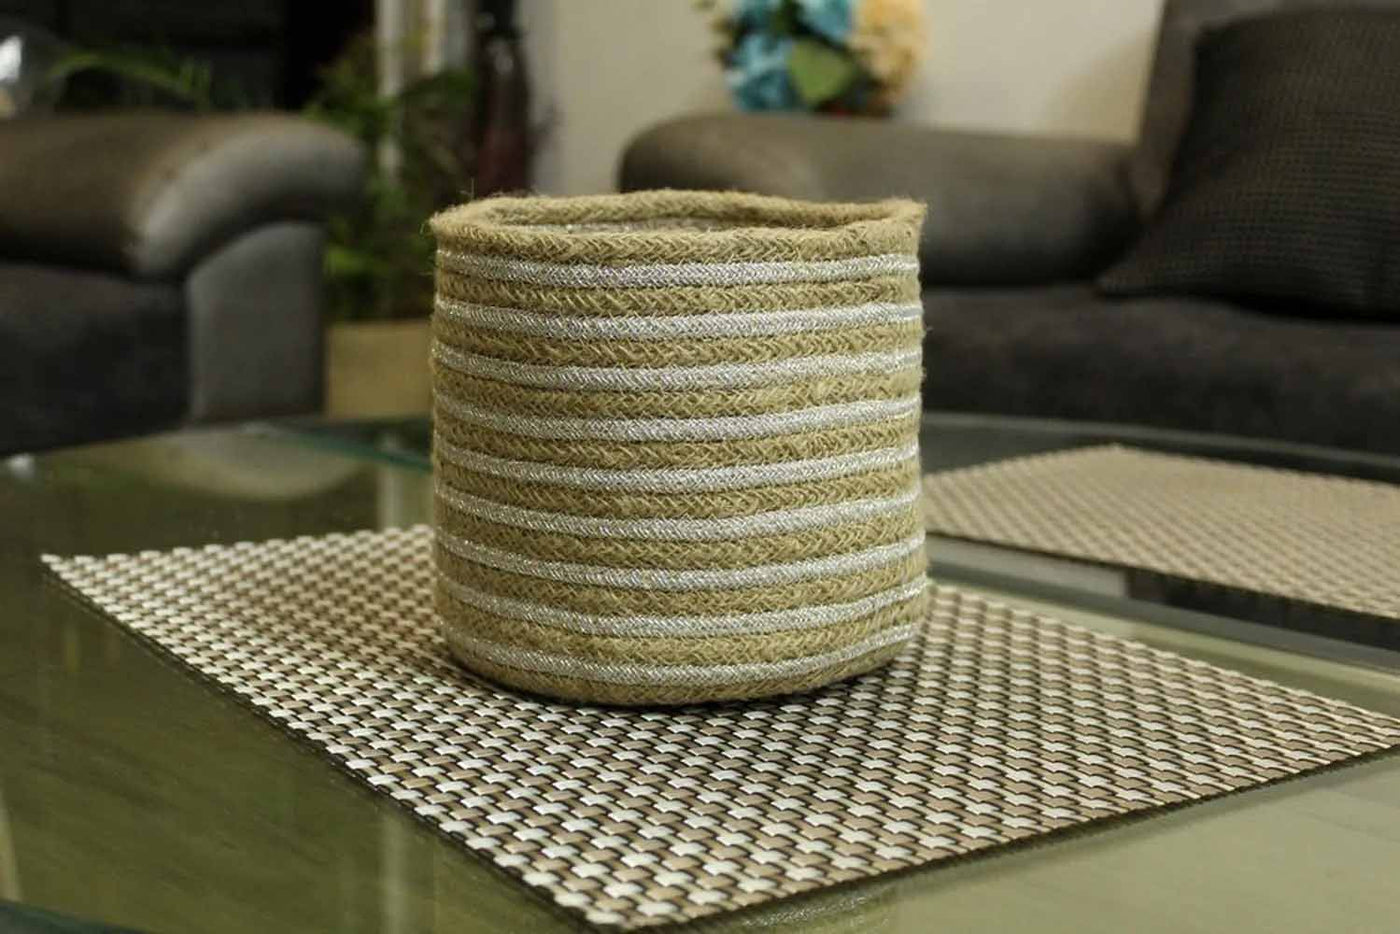 Beautiful Jute Lurex Beige and Silver Color Basket on Table By Party Stuff